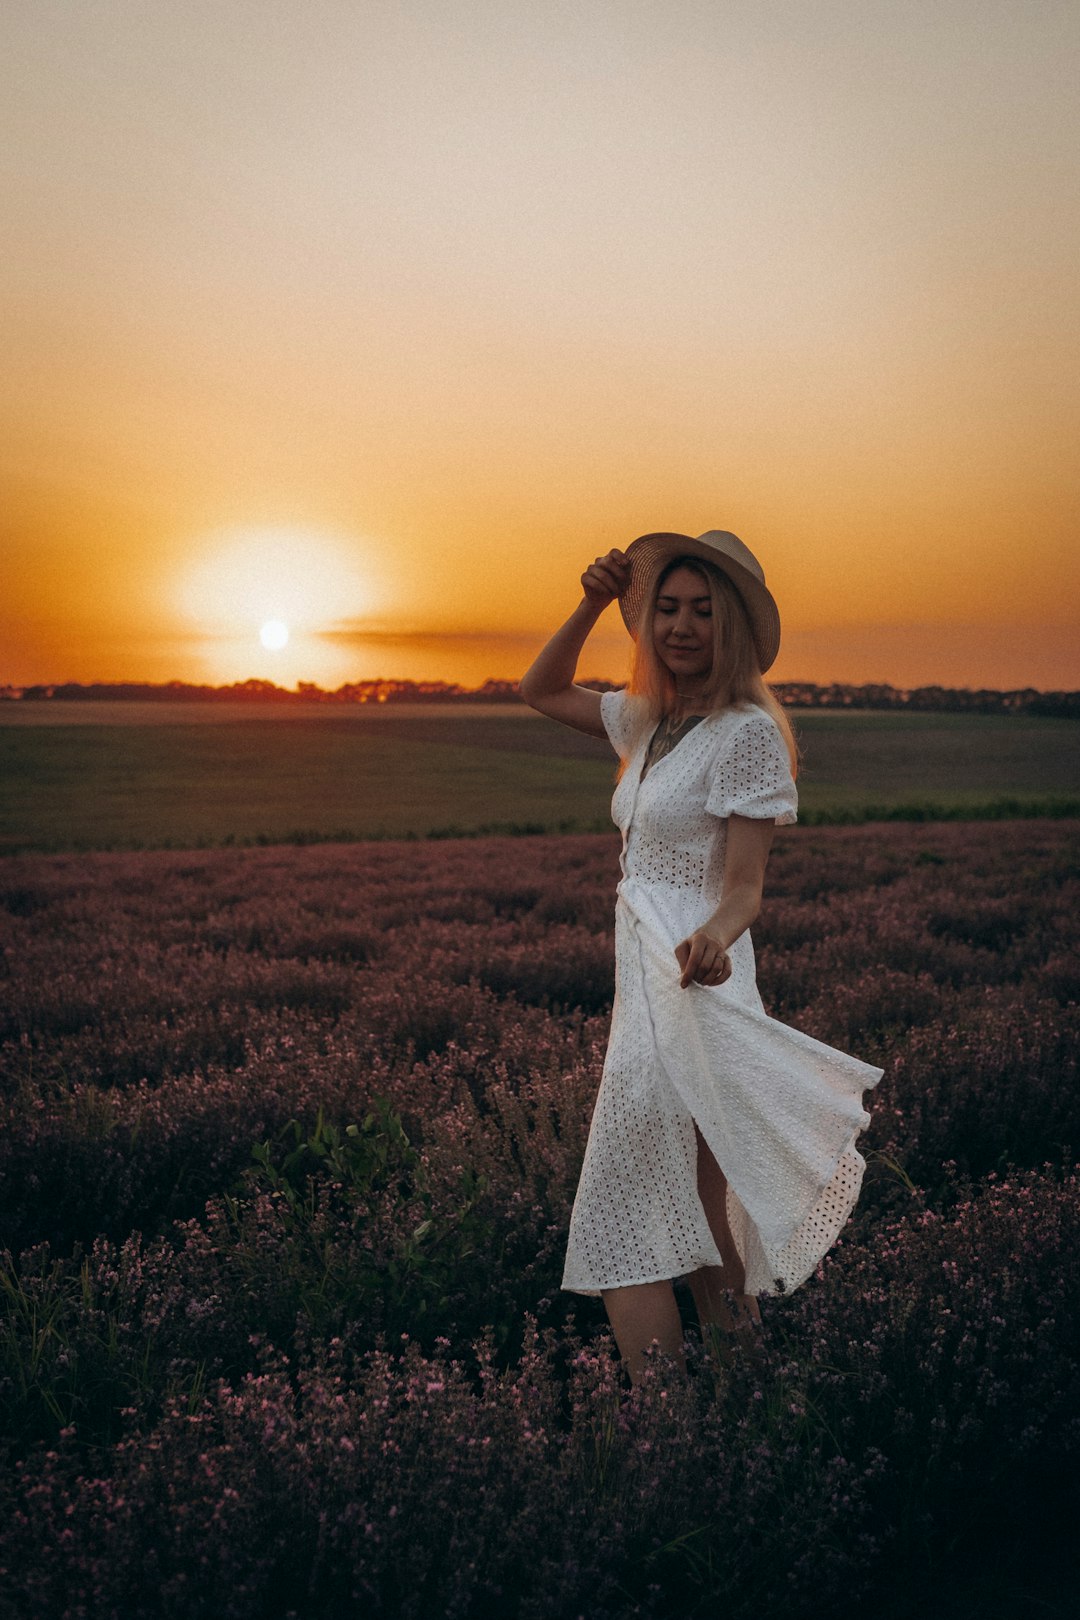 woman in white dress standing on green grass field during sunset